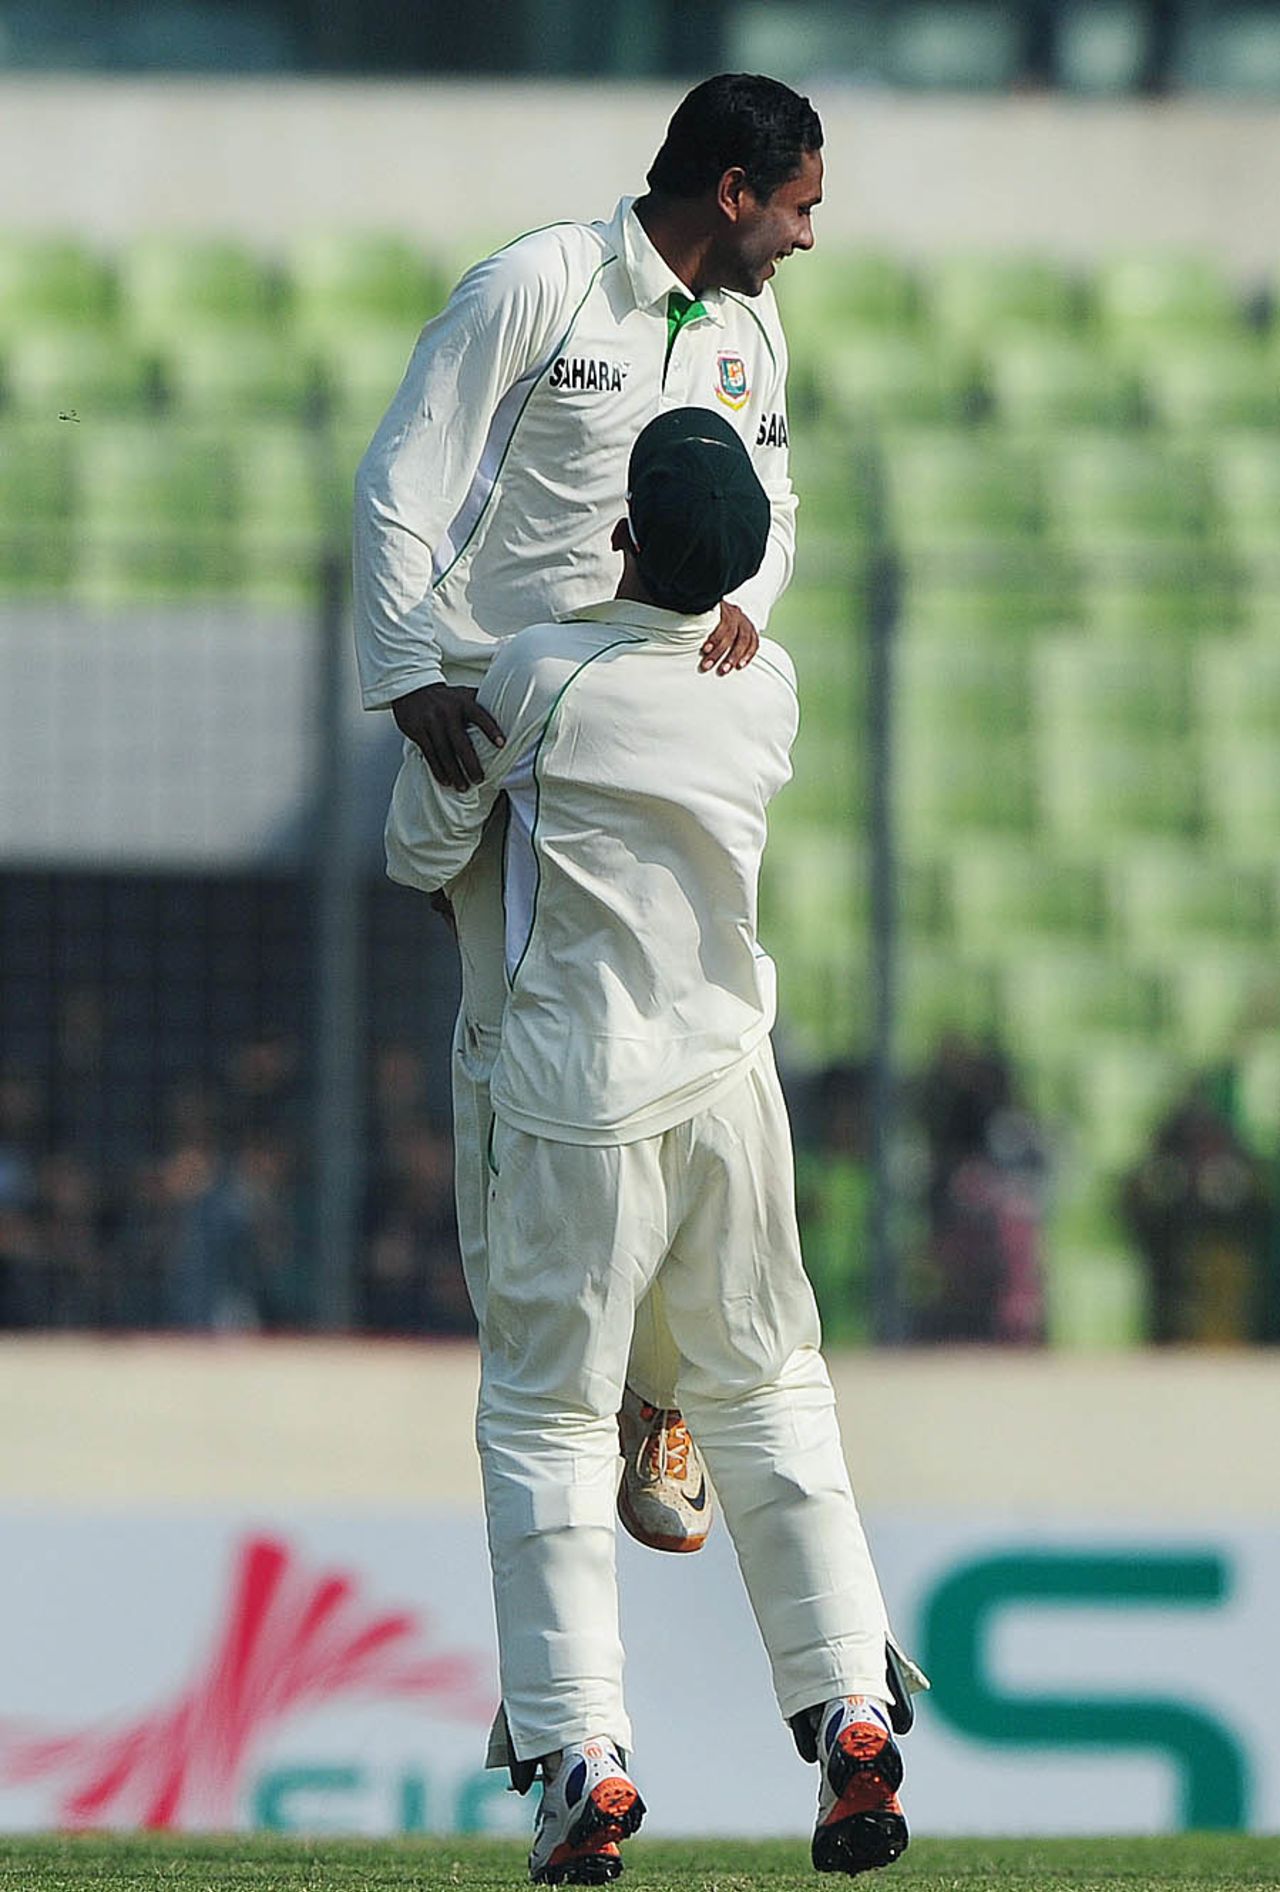 Sohag Gazi is lifted by one of his team-mates after Kieran Powell was dismissed, Bangladesh v West Indies, 1st Test, 1st day, Mirpur, November 13, 2012